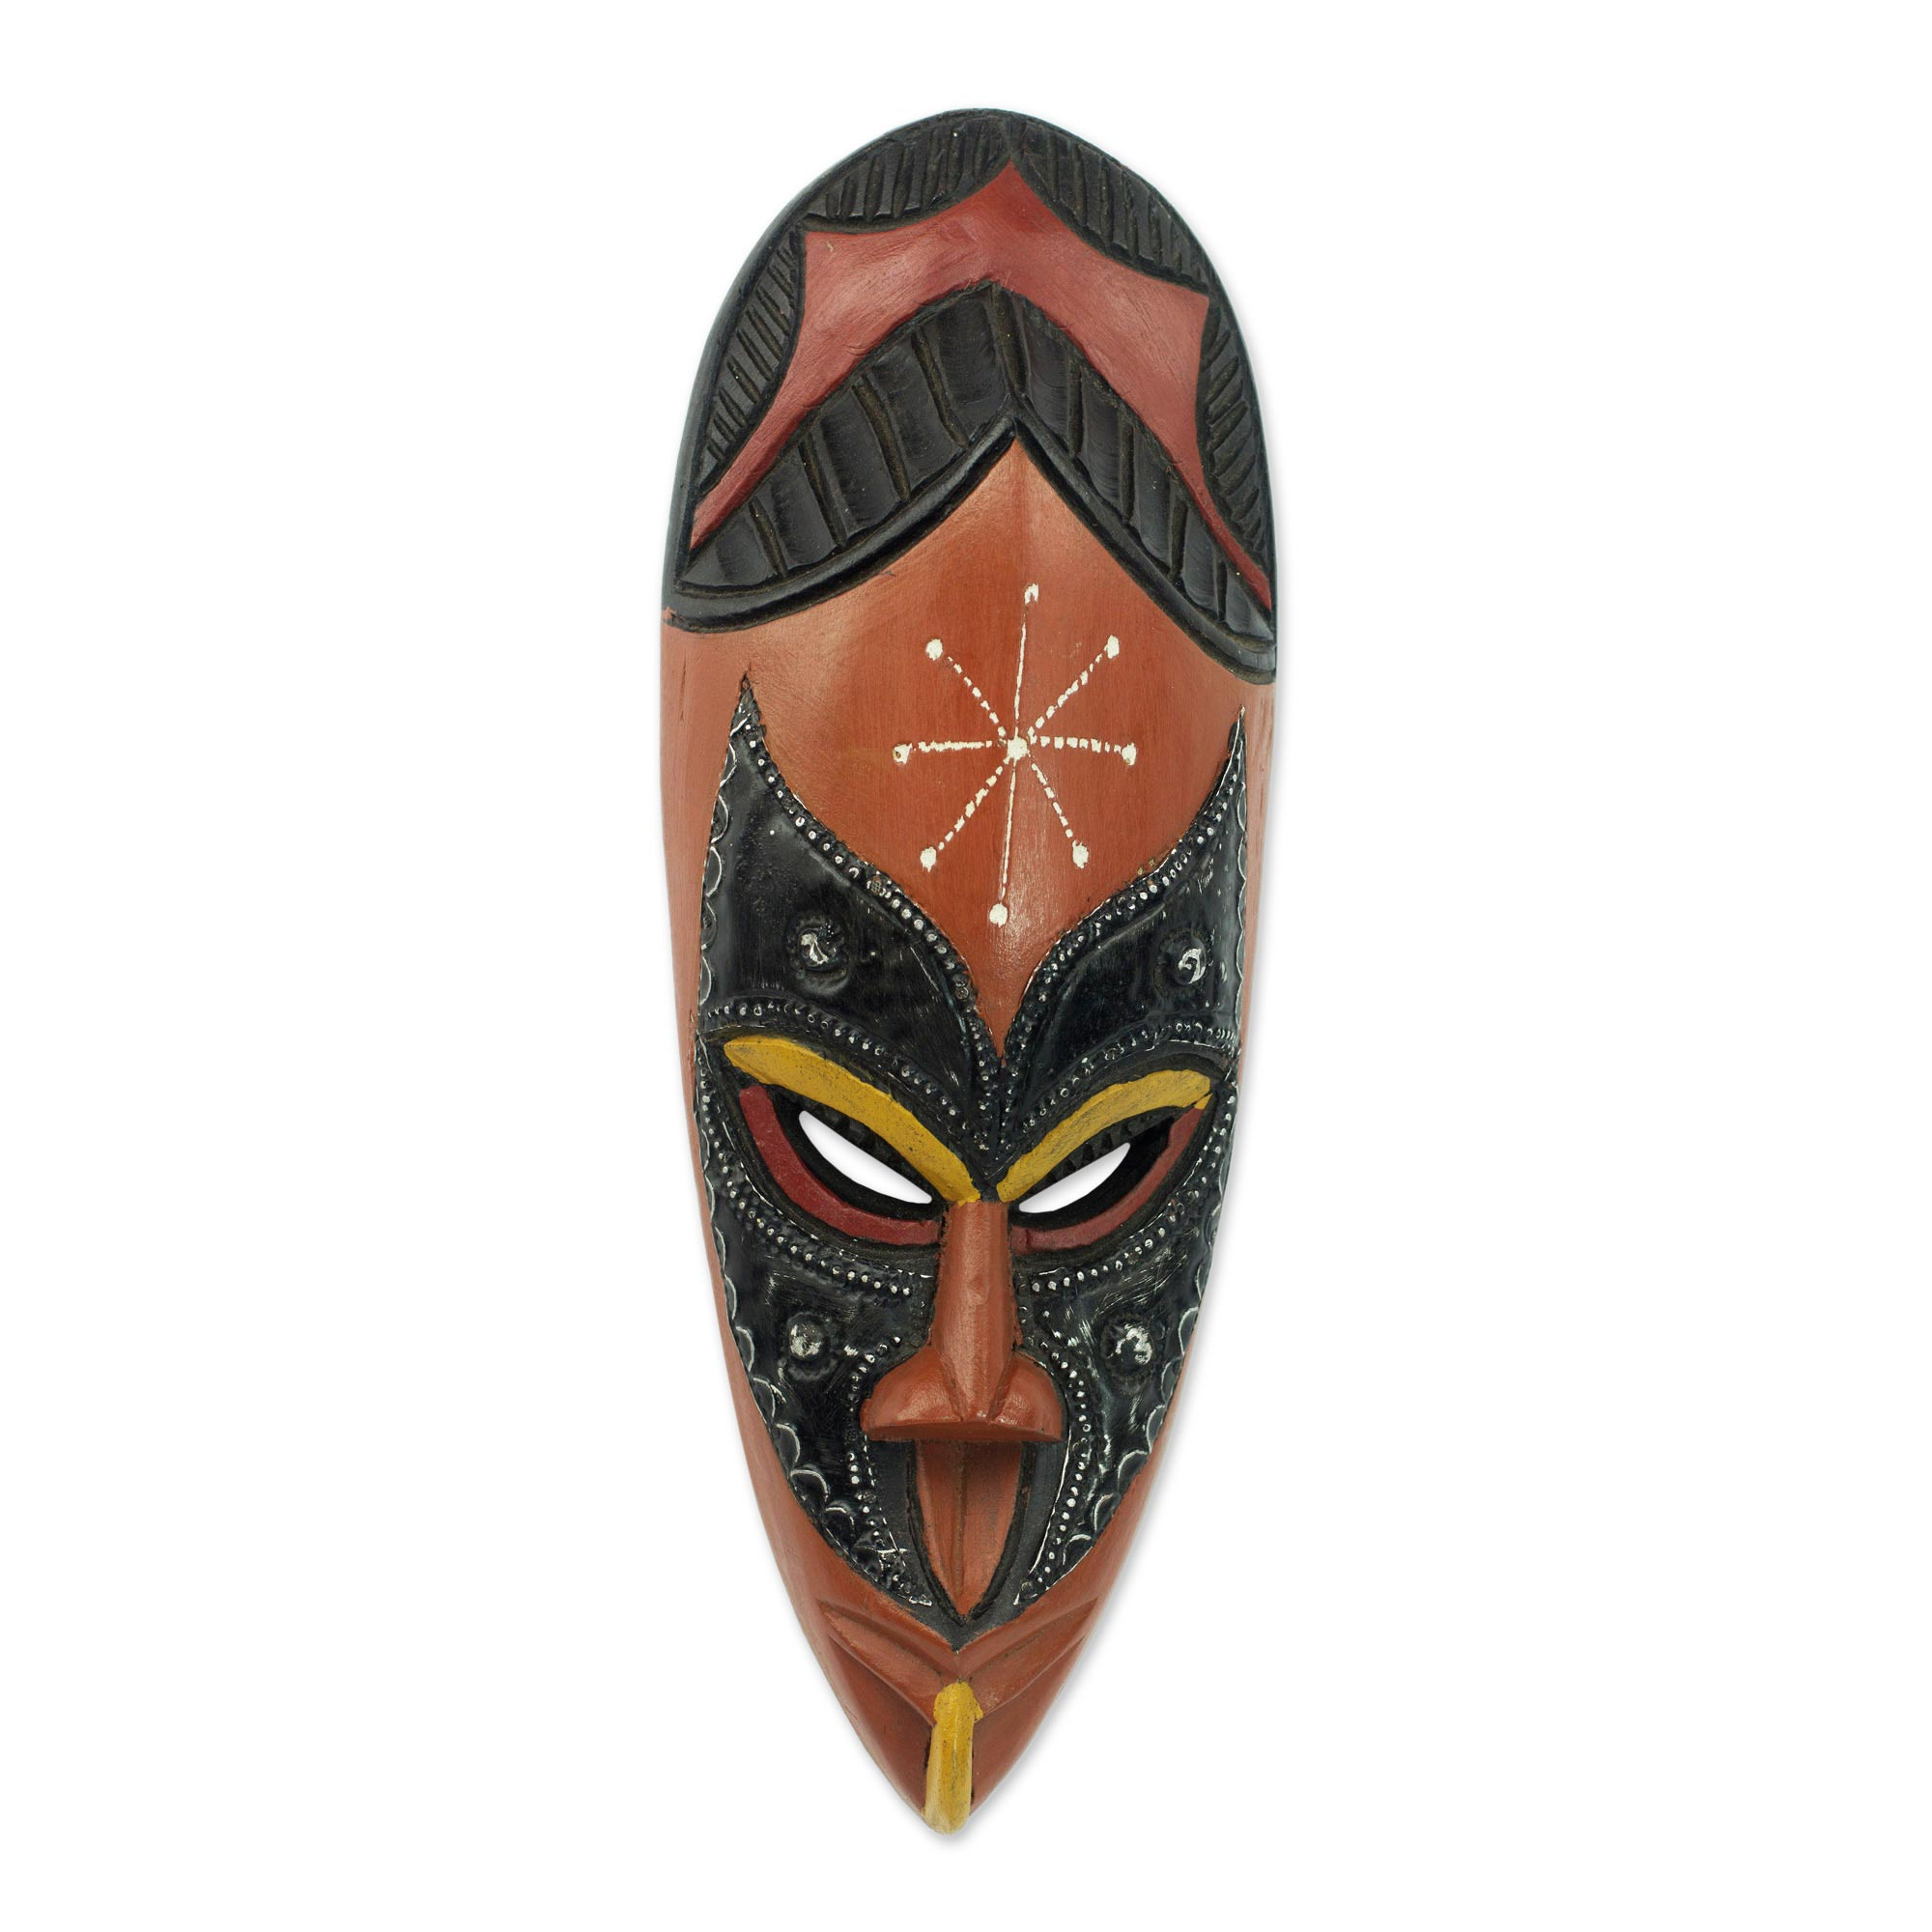 Unicef Market Hand Carved Sese Wood African Mask From Ghana Righteous